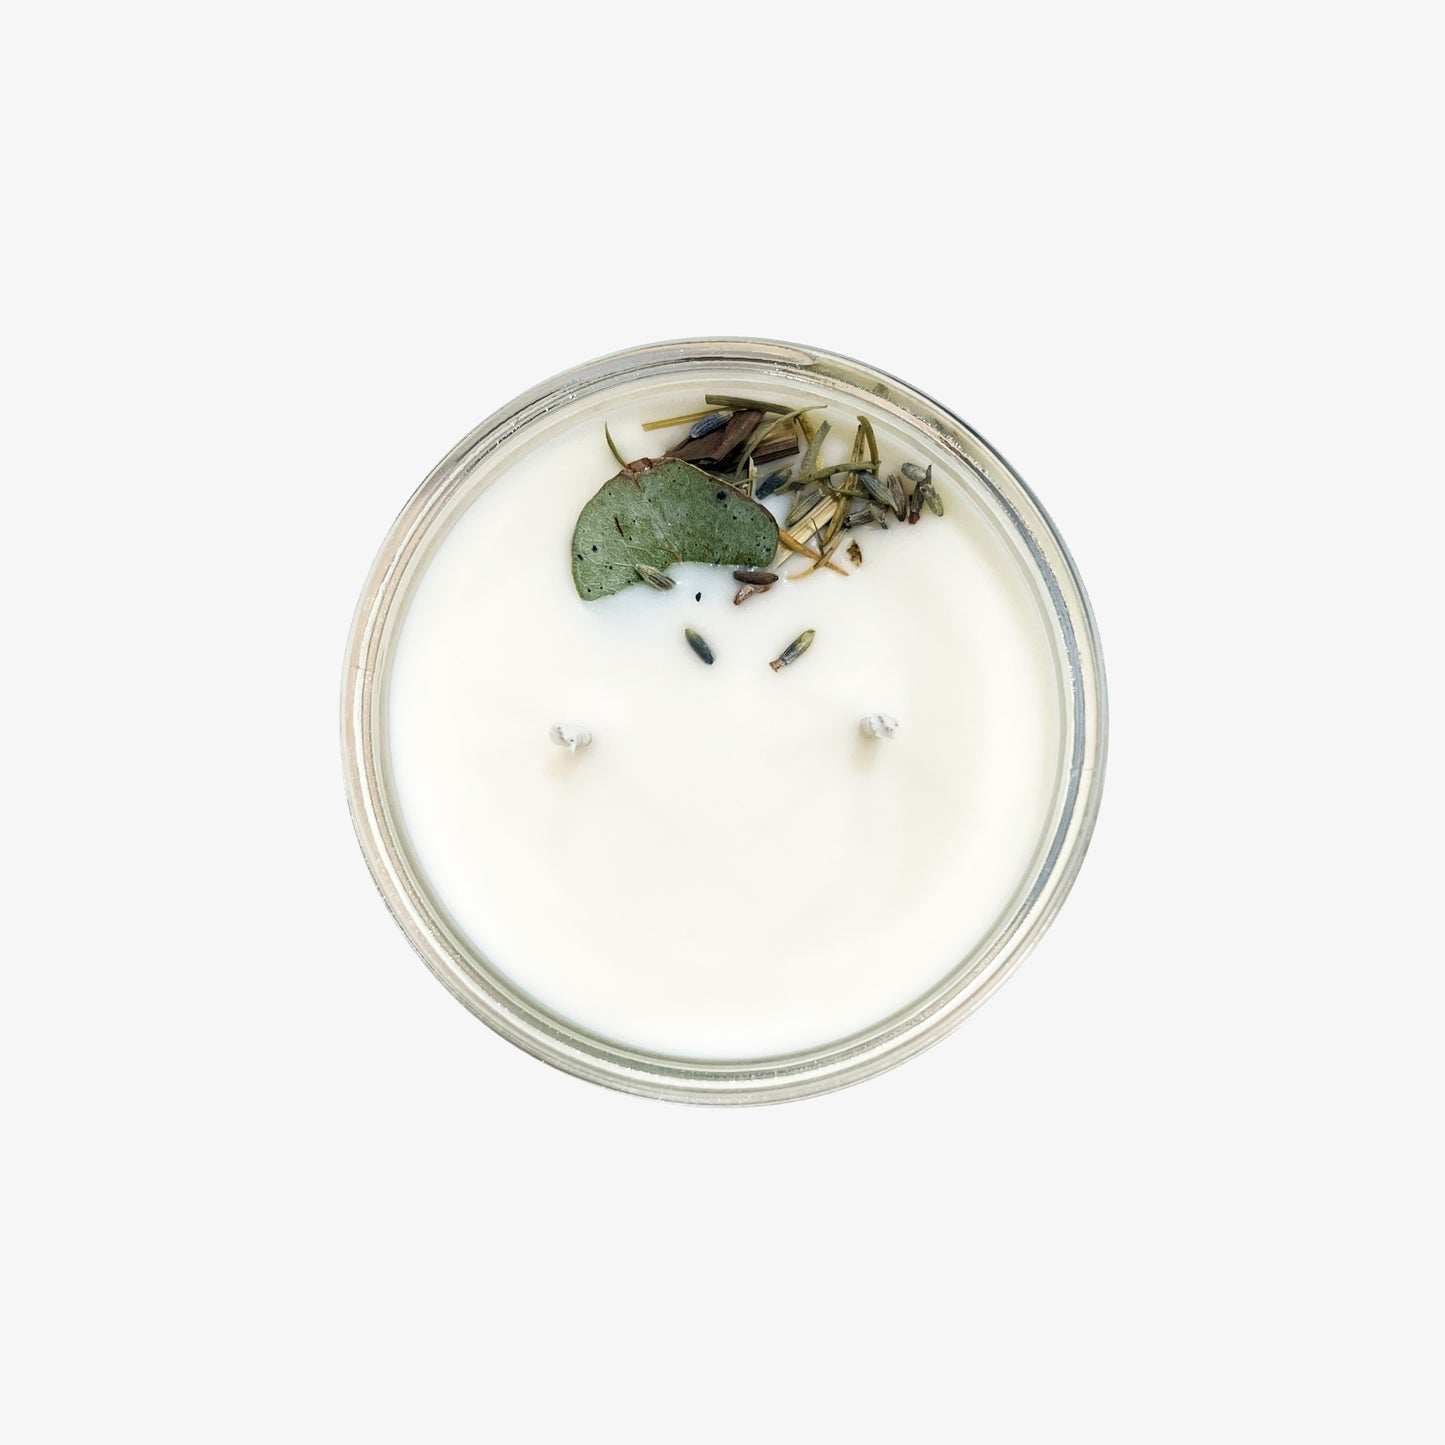 Citronella Herb Candle